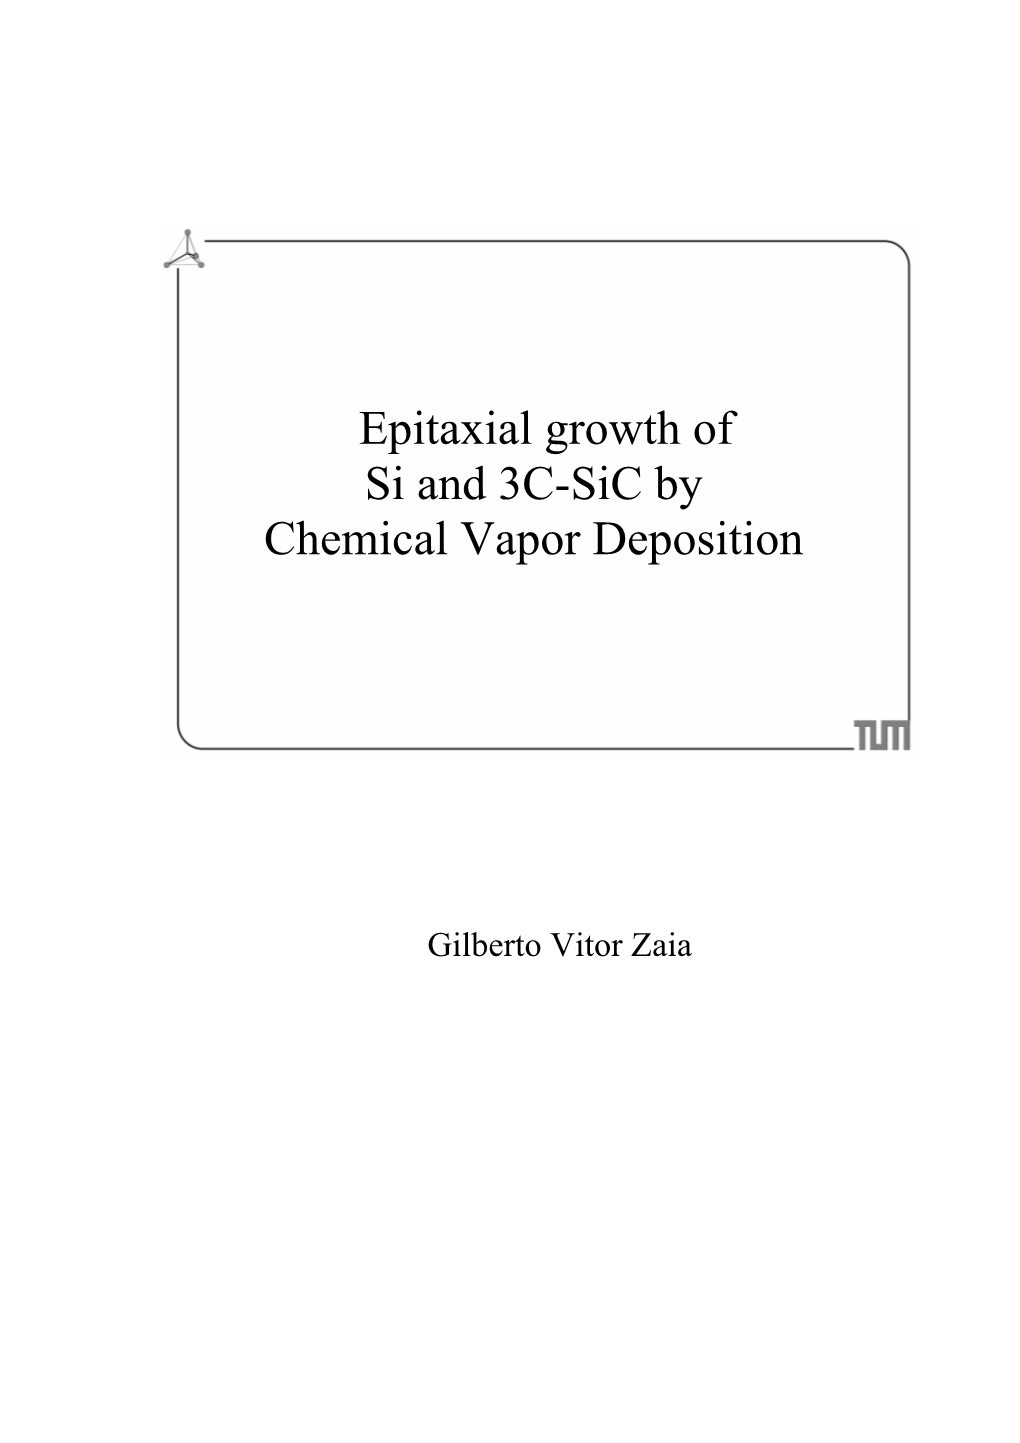 Epitaxial Growth of Si and 3C-Sic by Chemical Vapor Deposition